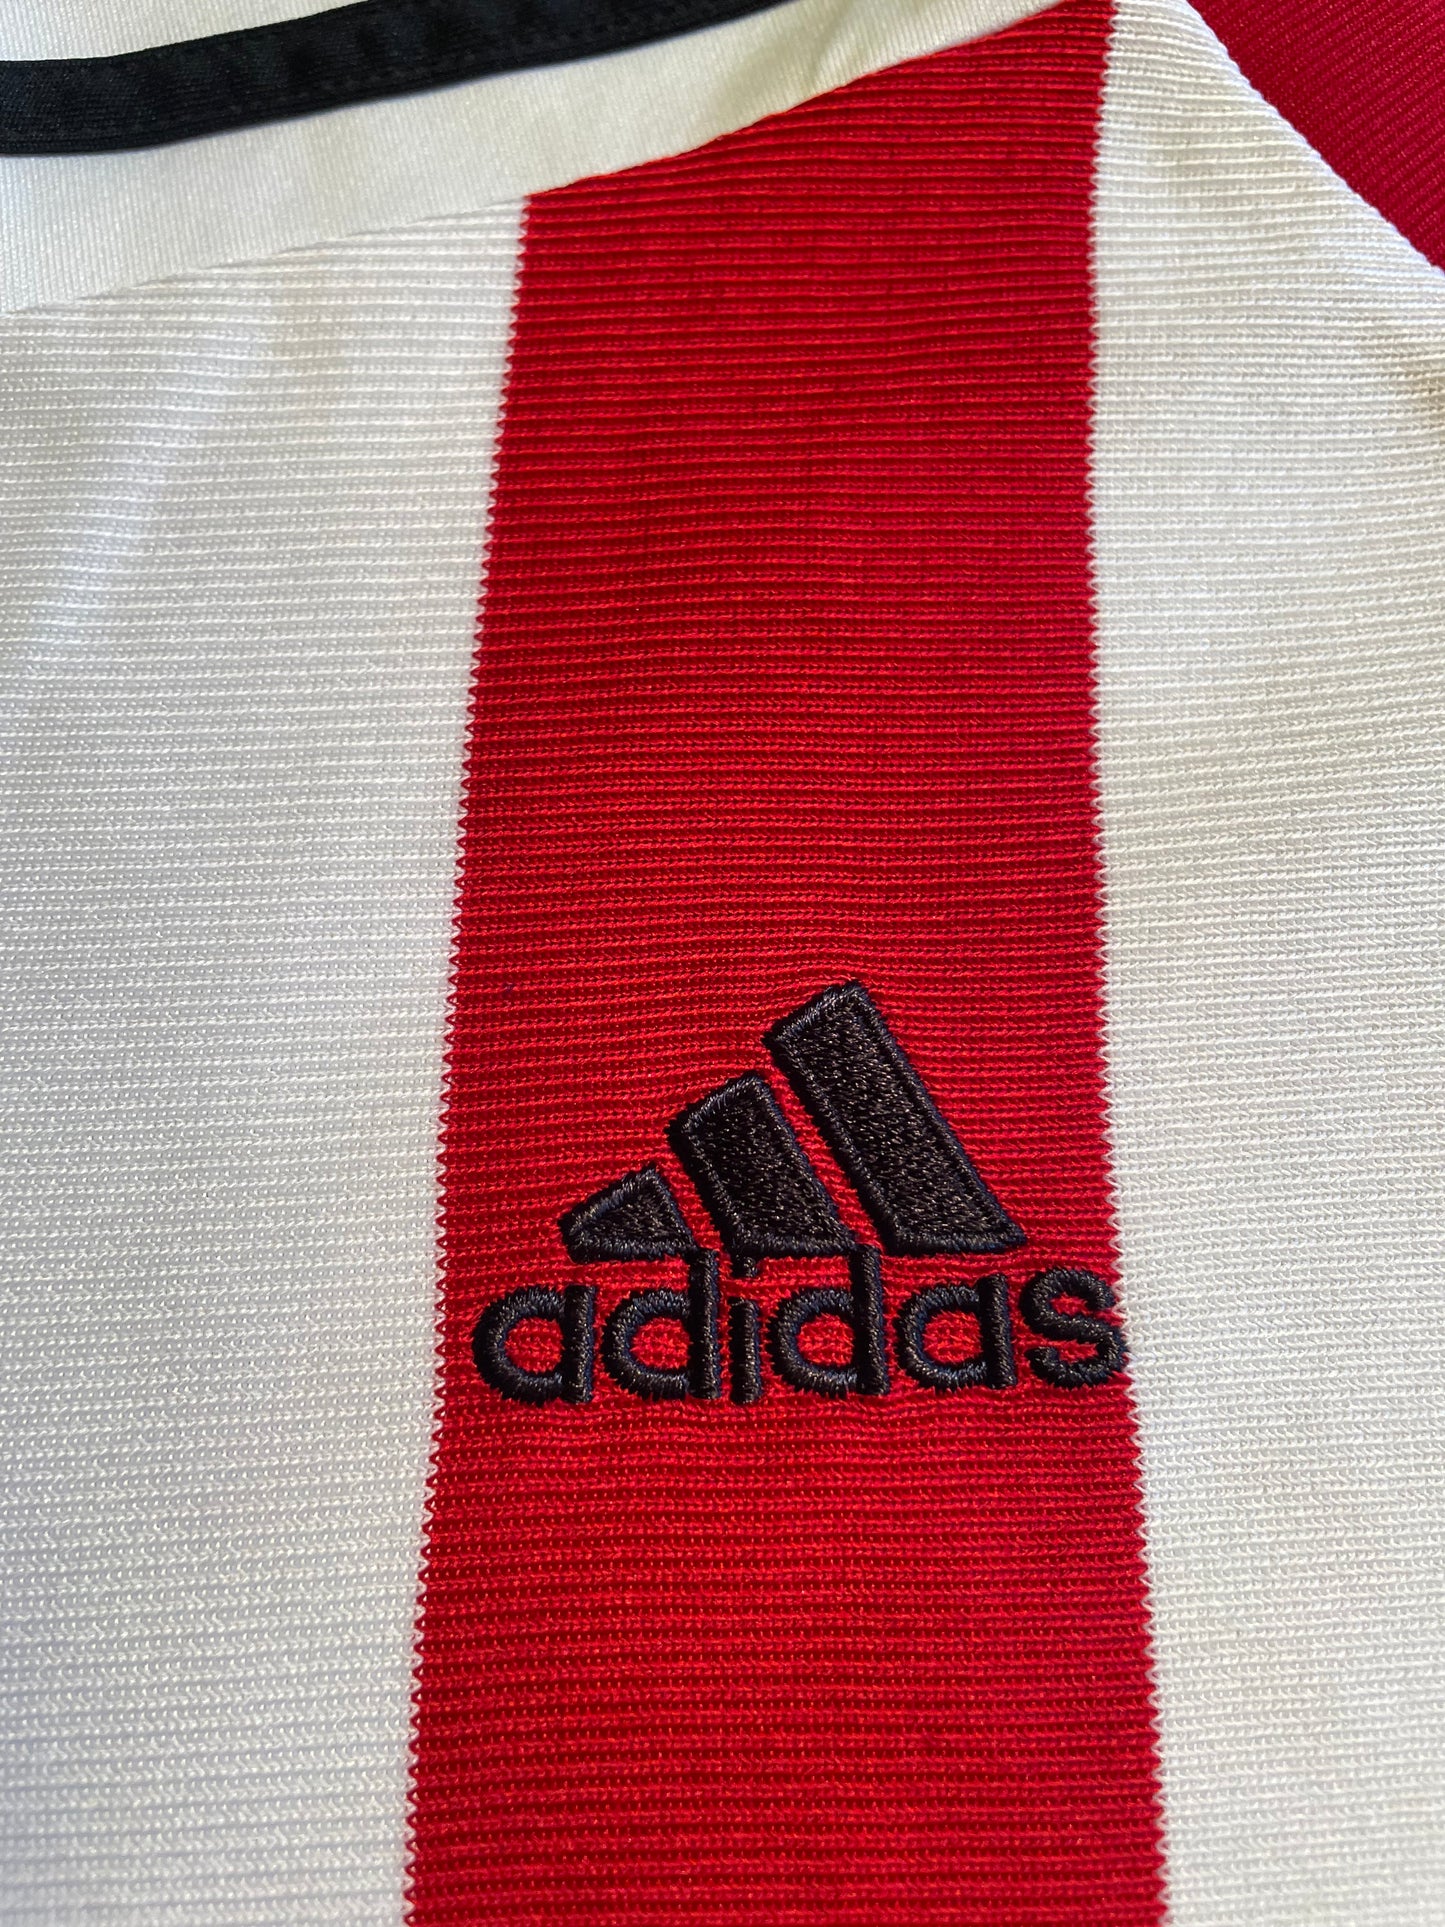 Sheffield United 2018 Home Shirt (very good) Age 11 to 12 years. Height 17.5 inches